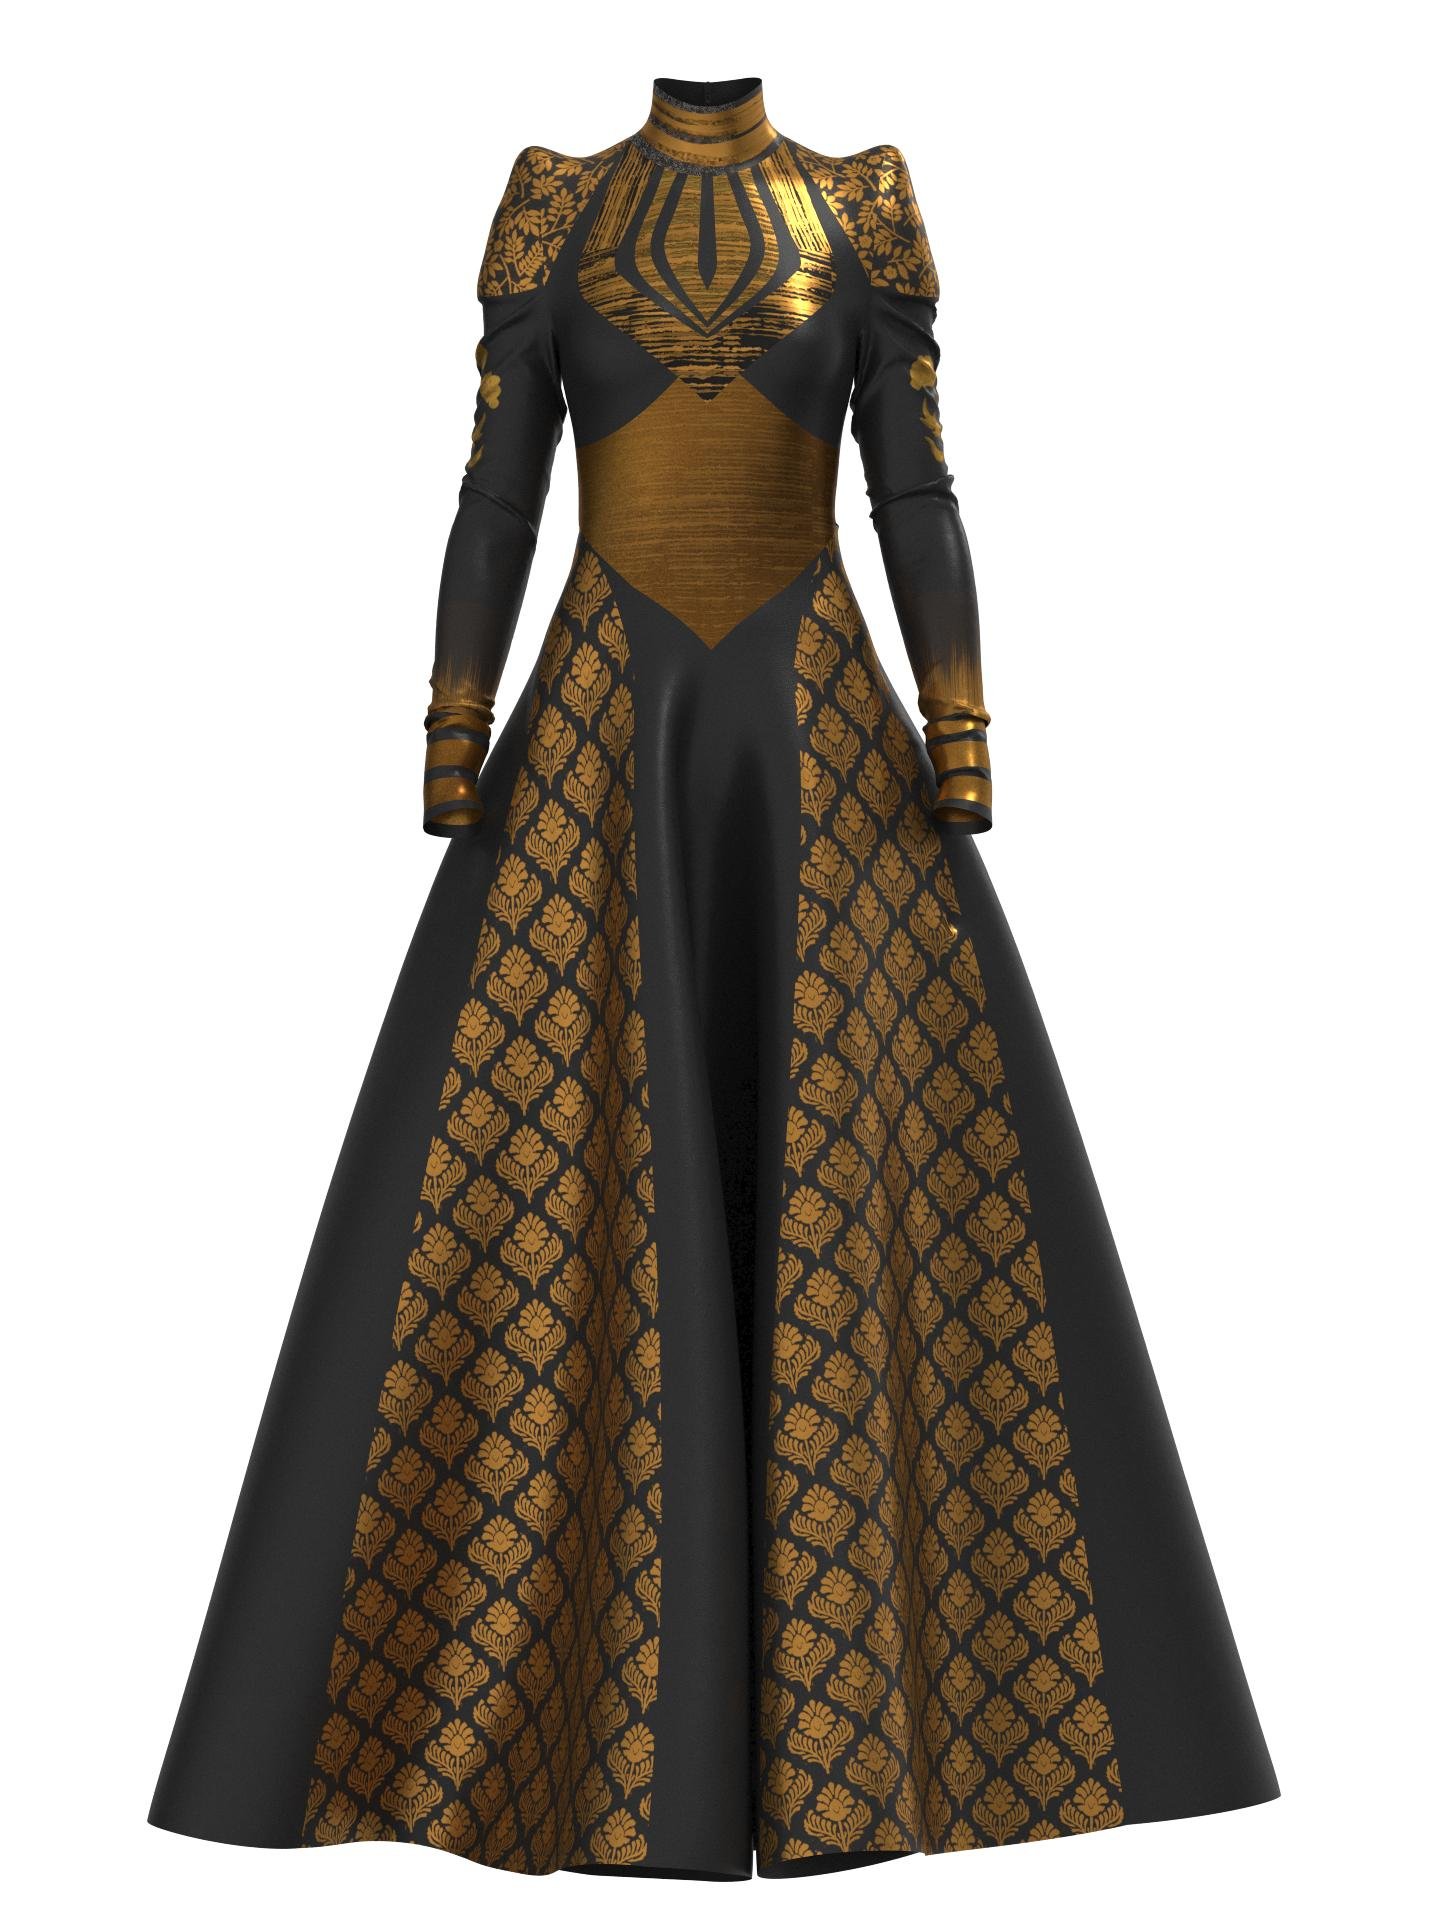 Queen Nefertiti Gown by NEOMODEST